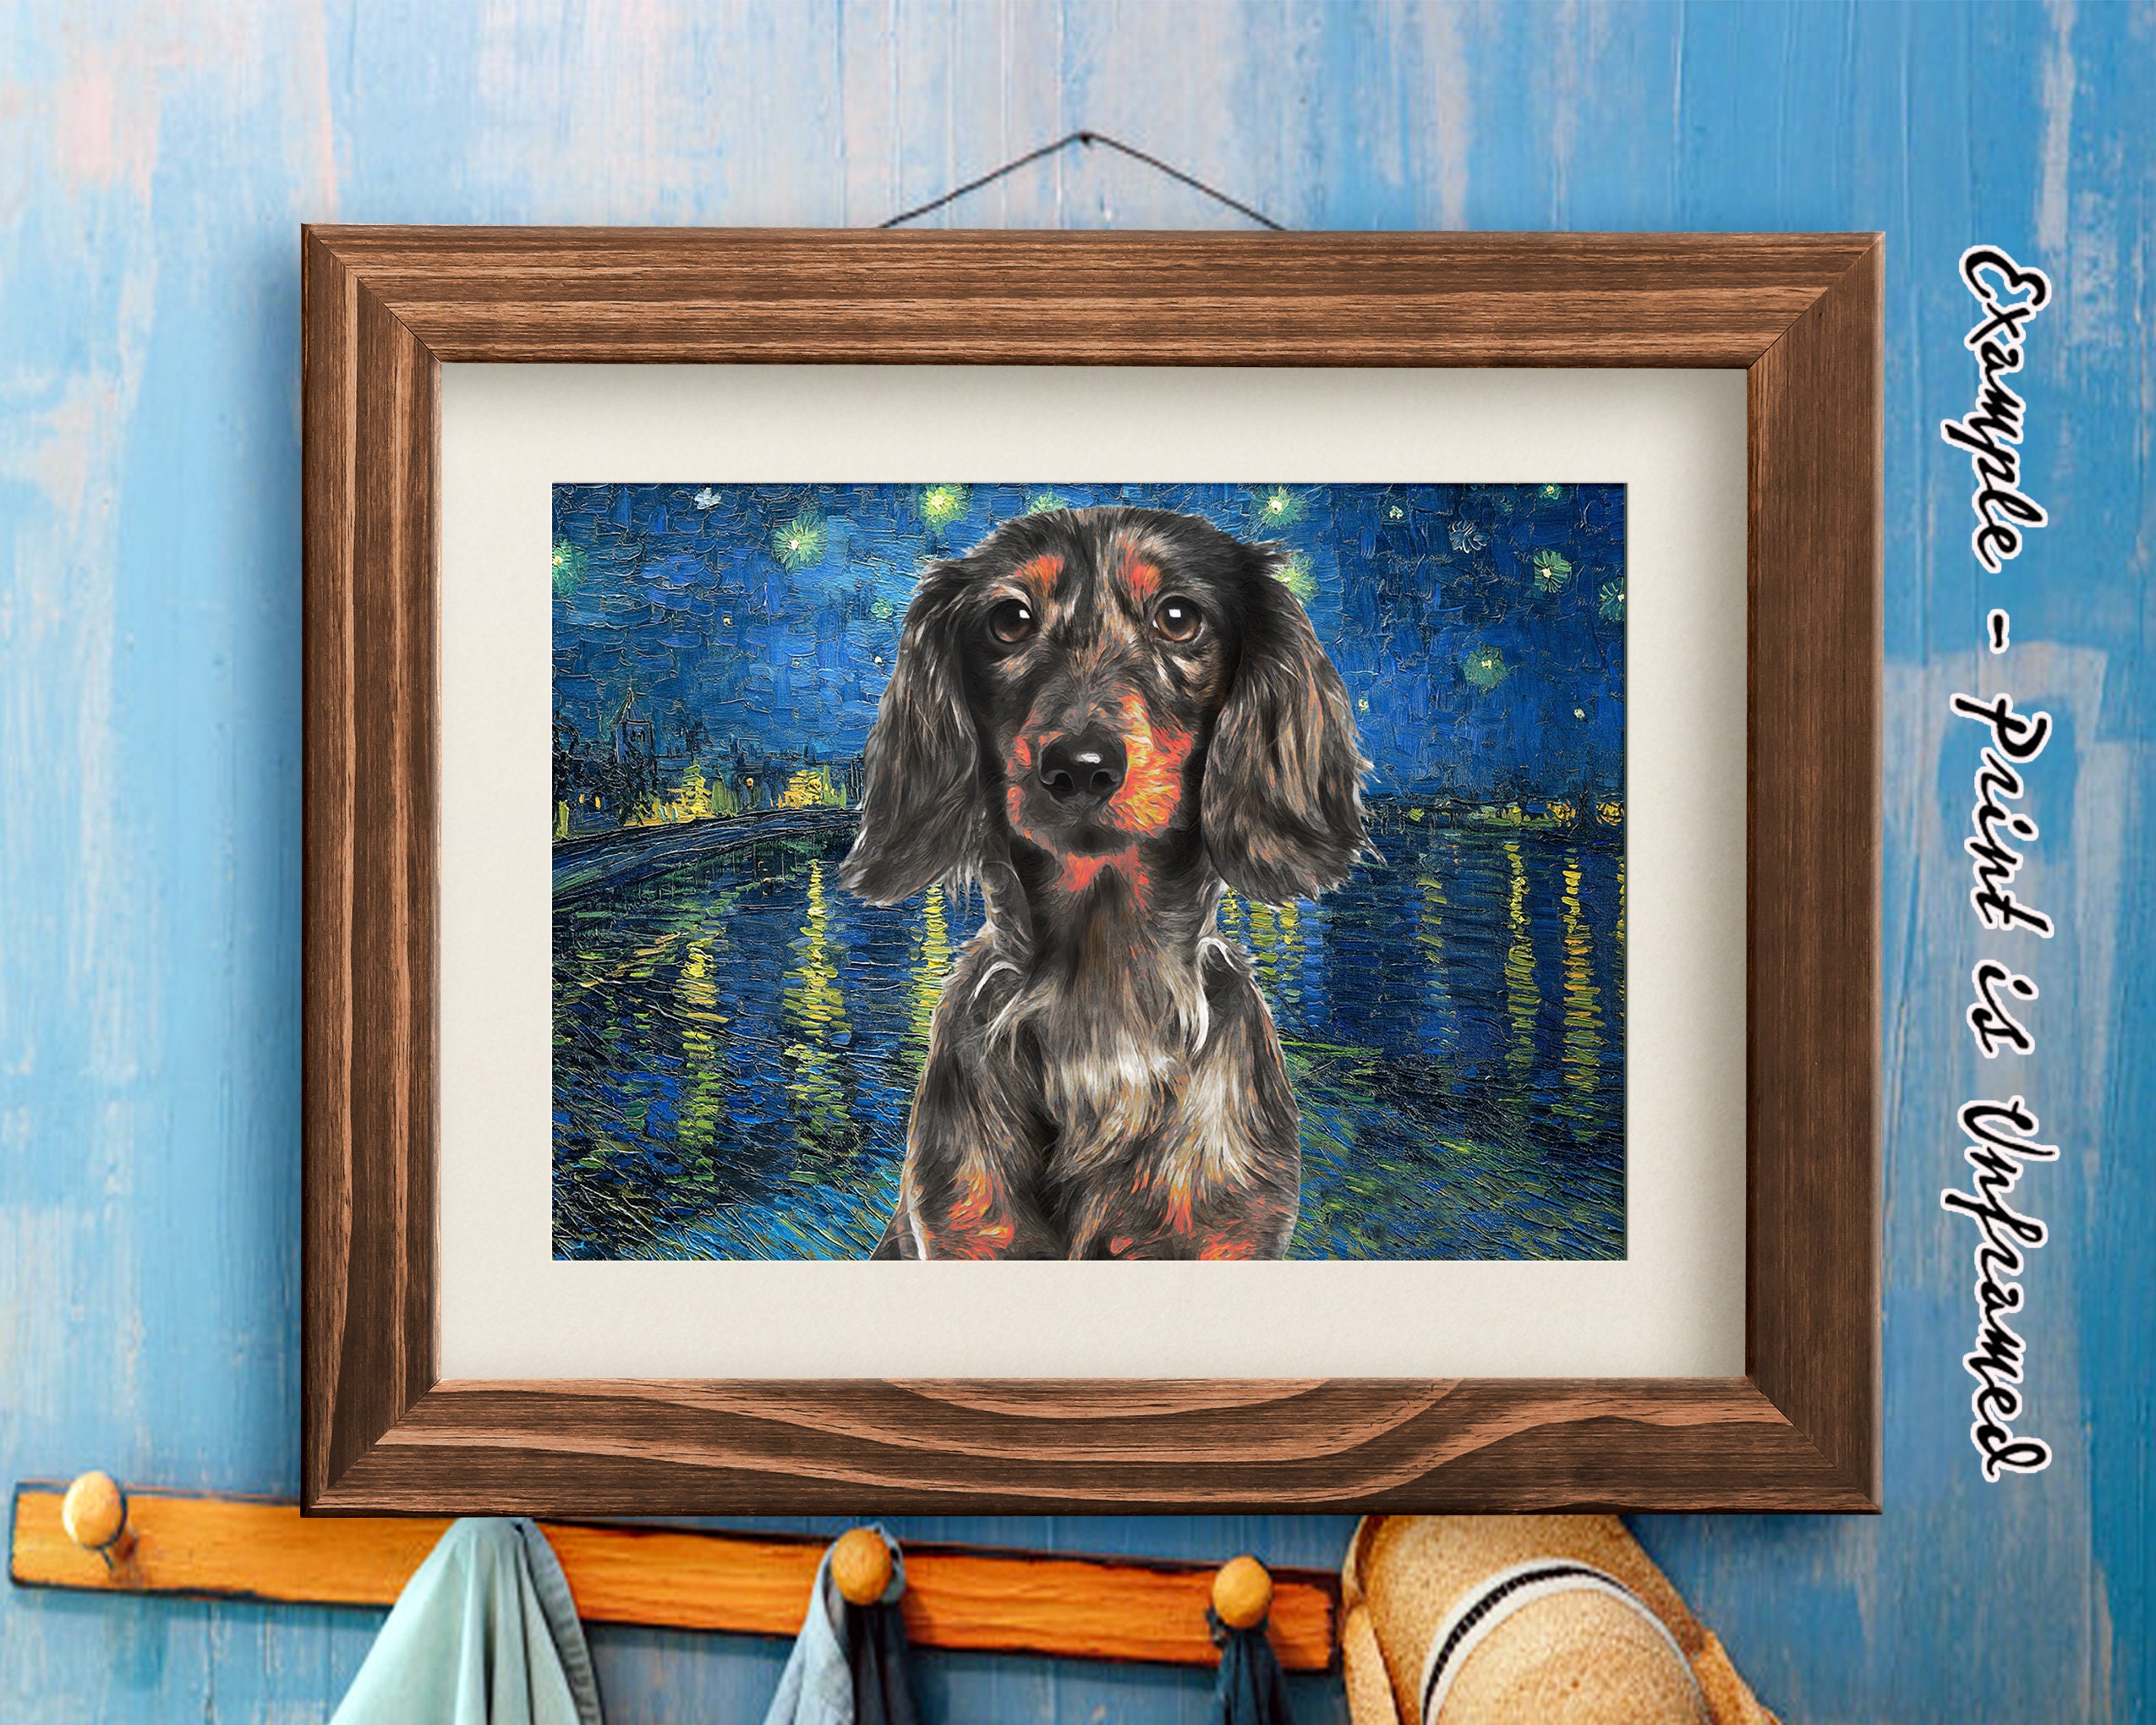 Doxie Dad Dog Starry CANVAS Art Personalized Van Night Etsy and Merle Wiener Dachshund Long-haired Dapple Mom Dog & Gogh Portrait - Gifts Mug Print